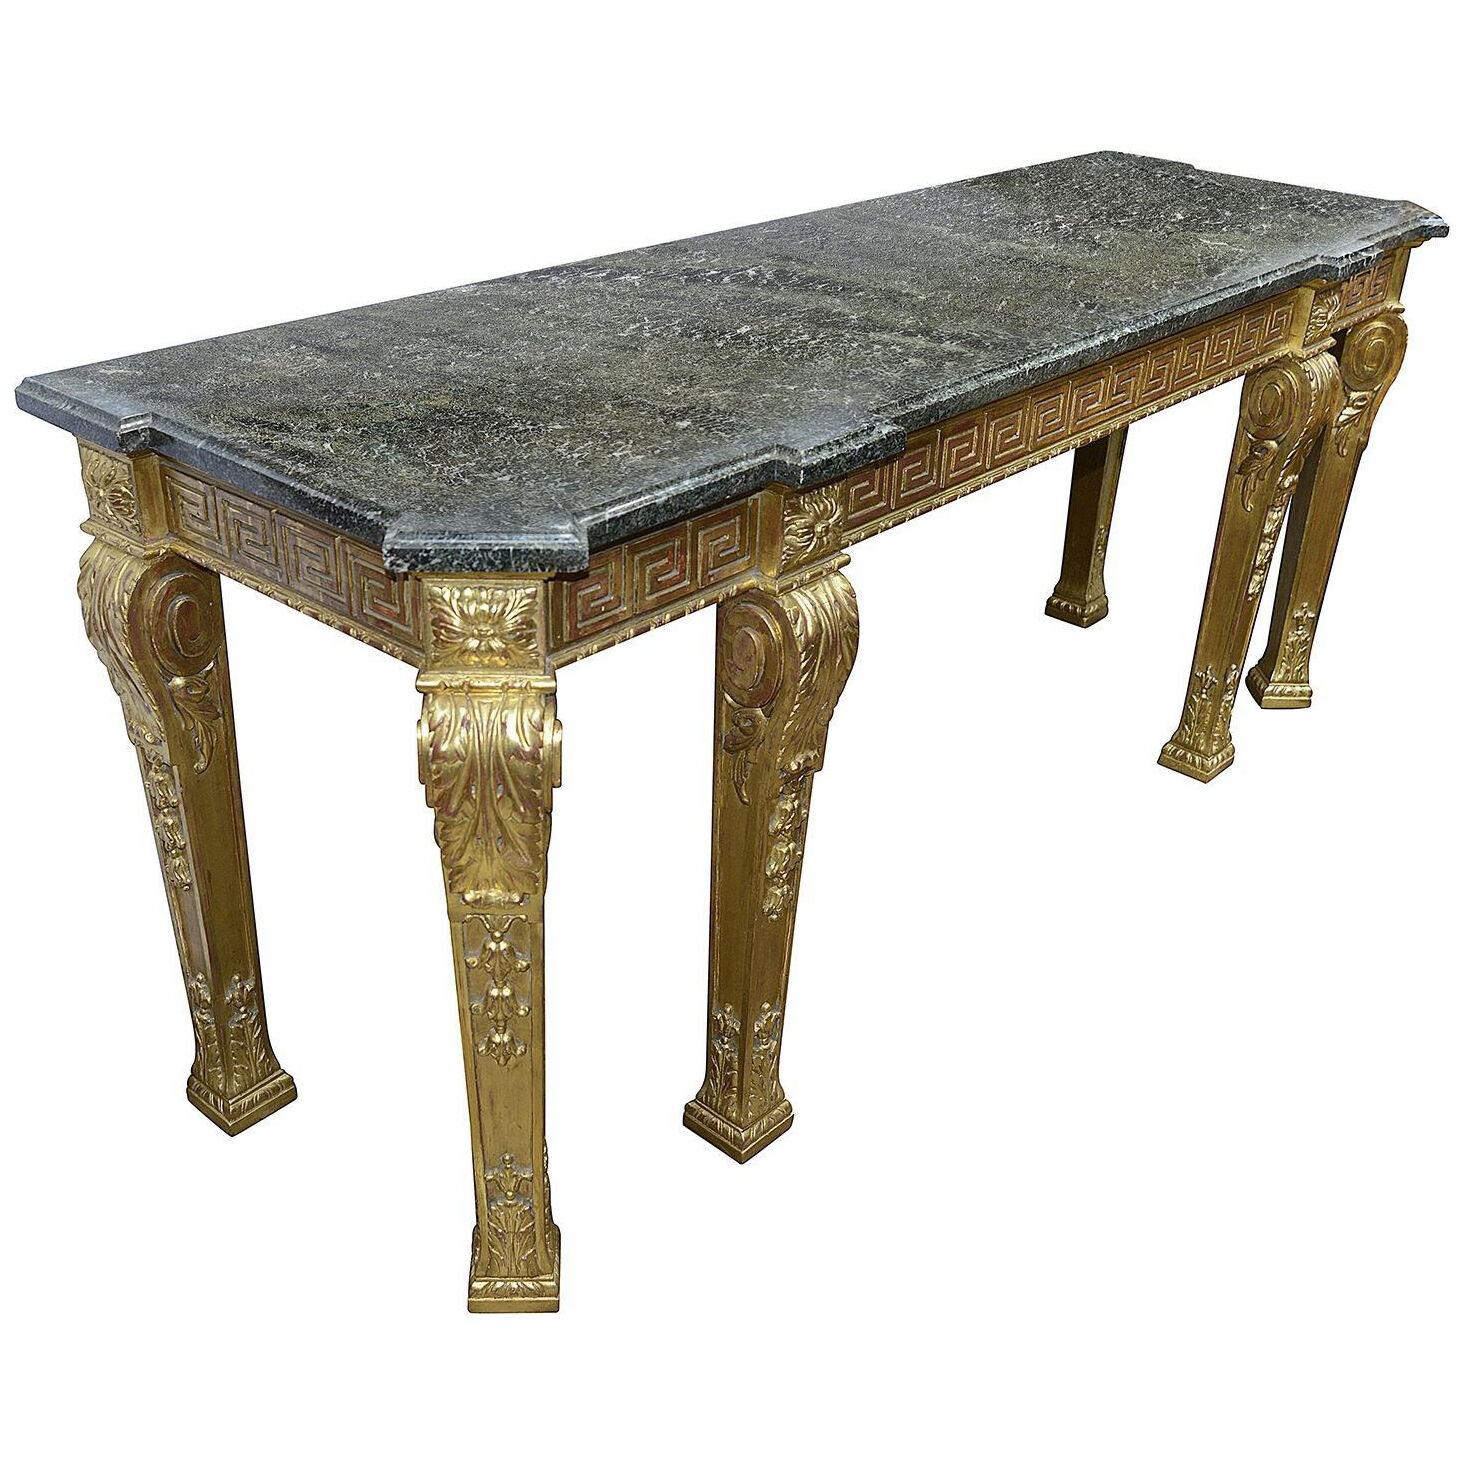 Adam influenced carevd giltwood Console table, by Charles Tozer, London